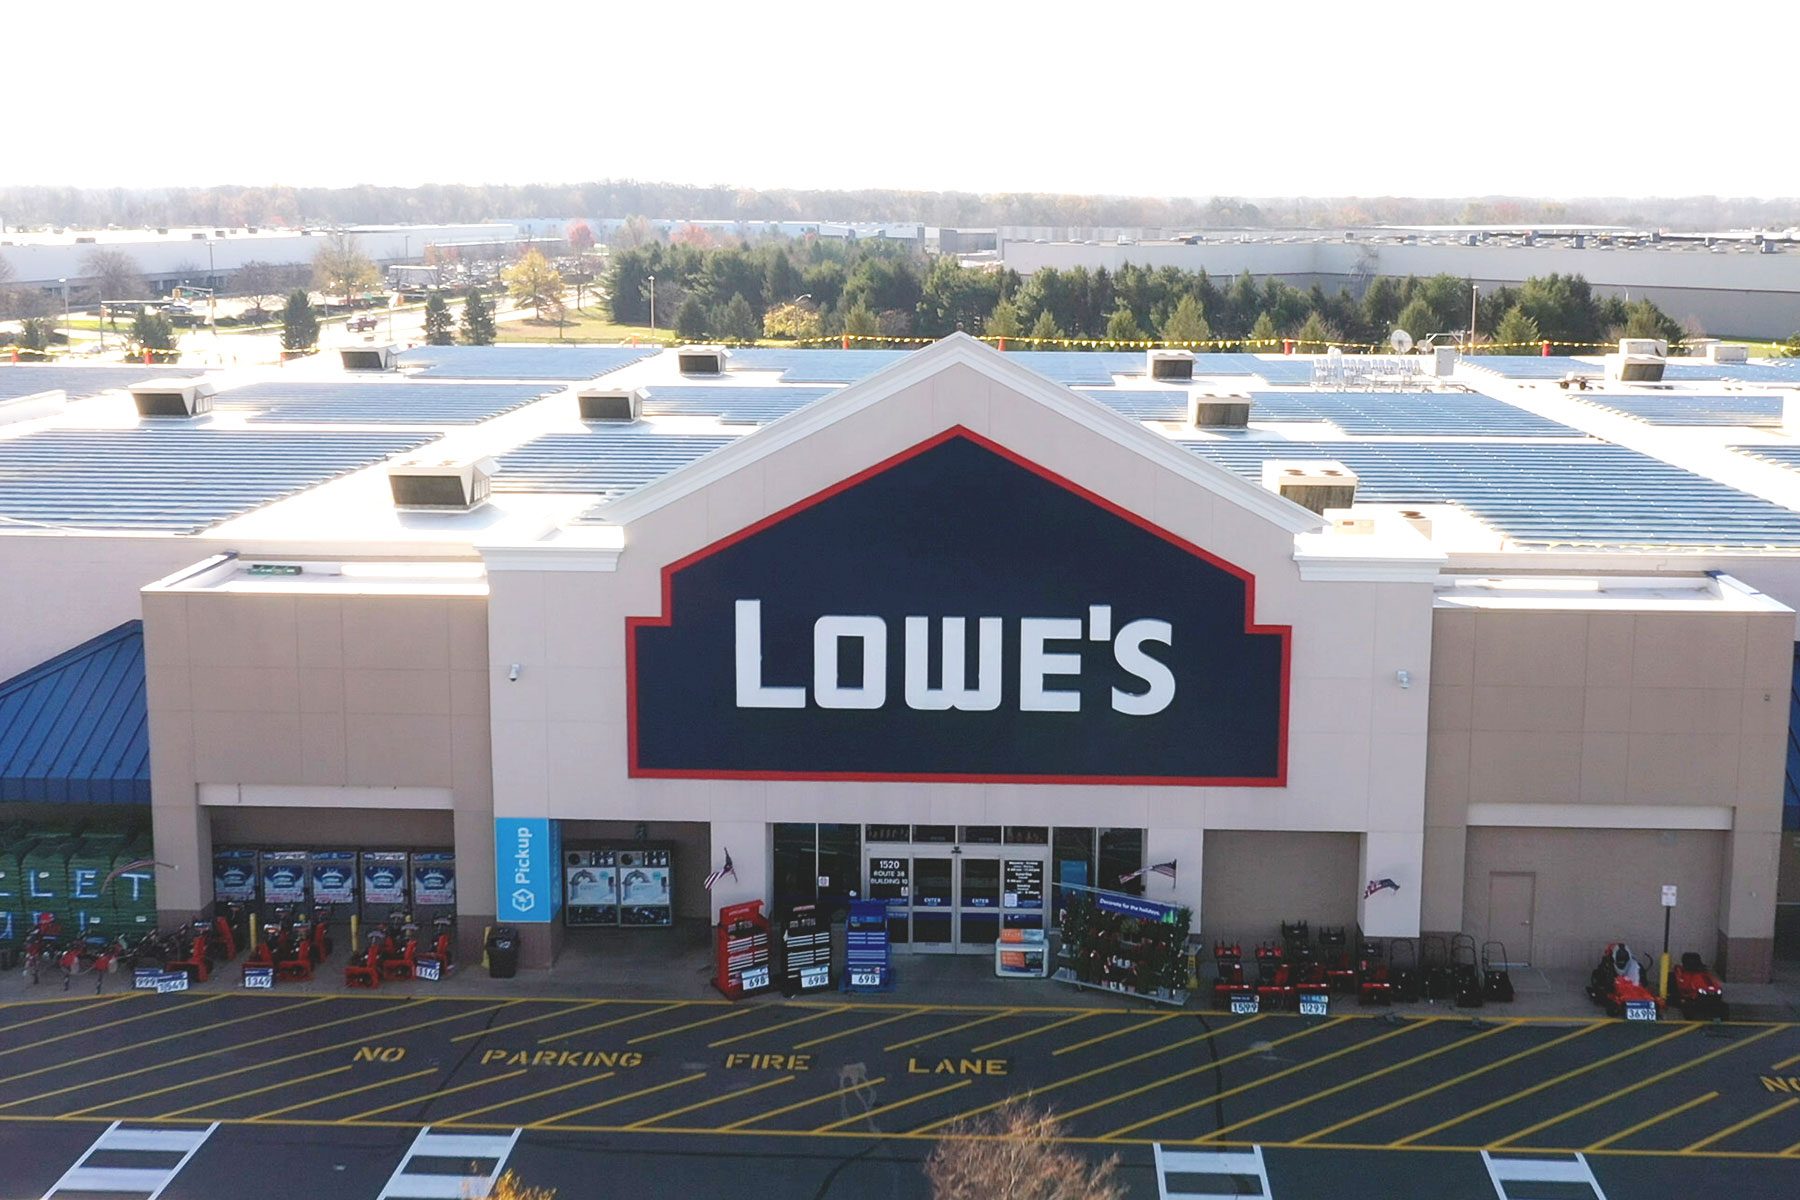 Lowe’s Is Installing Rooftop Solar Panels at Hundreds of Stores